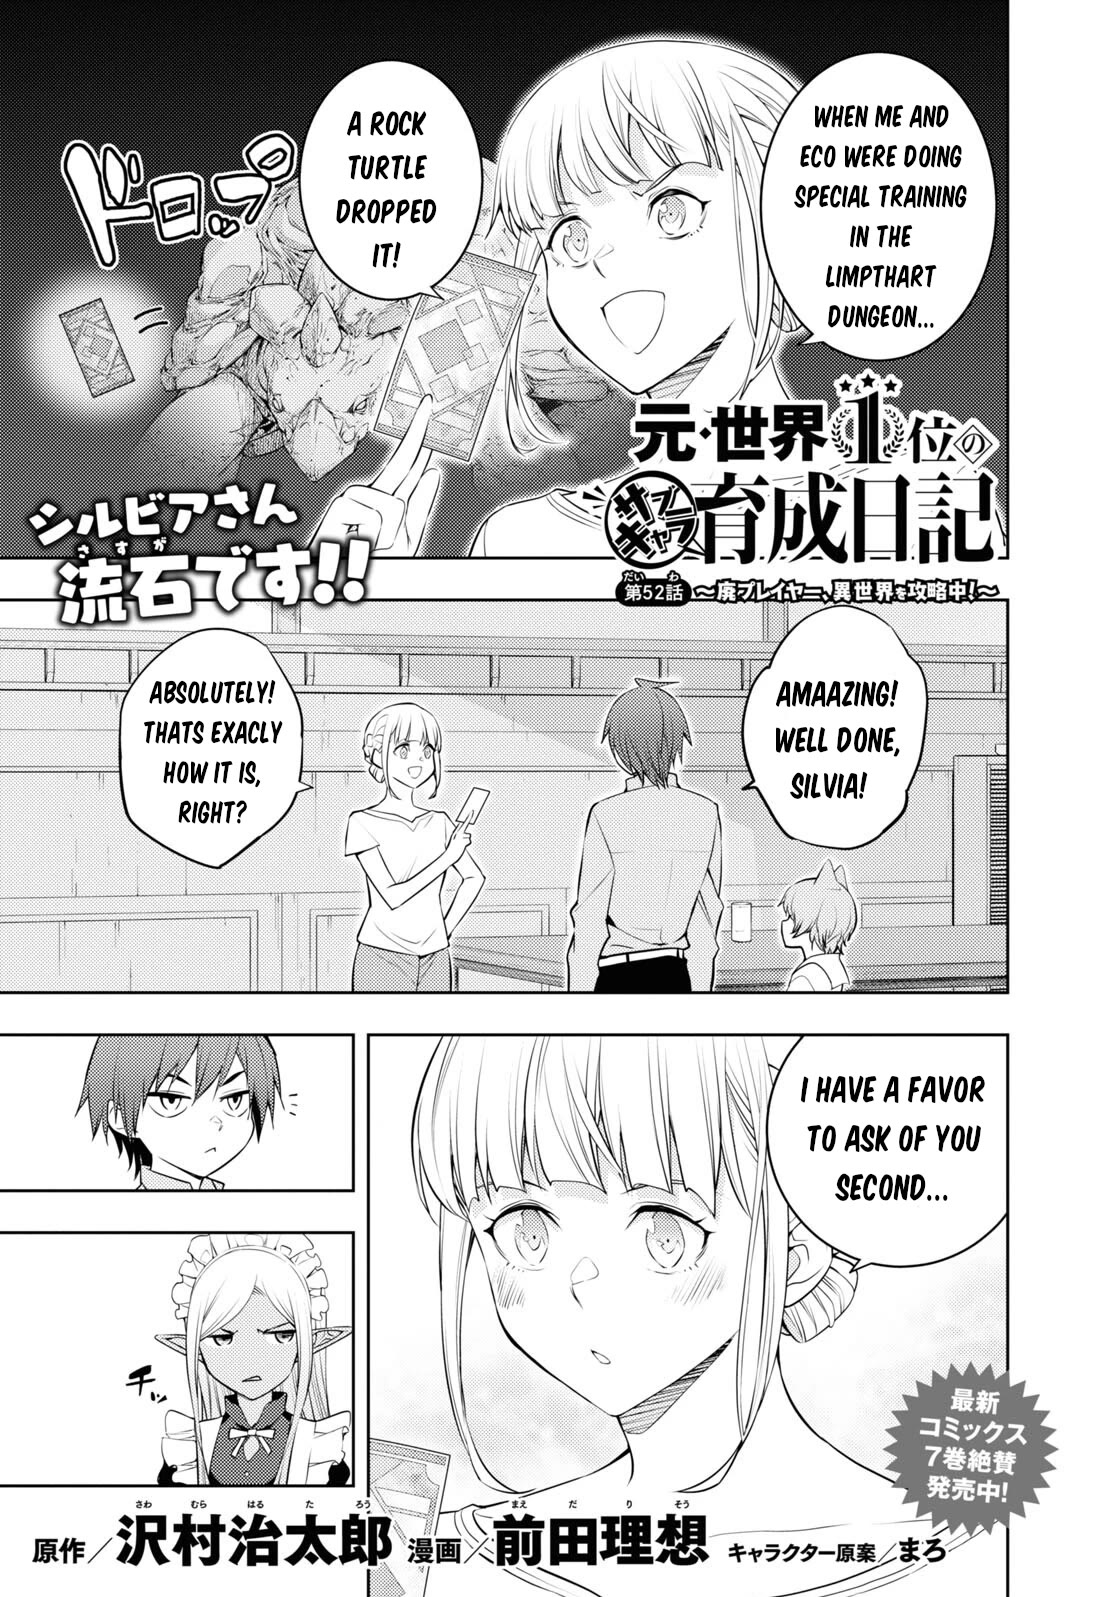 The Former Top 1's Sub-Character Training Diary ~A Dedicated Player Is Currently Conquering Another World!~ - Page 1